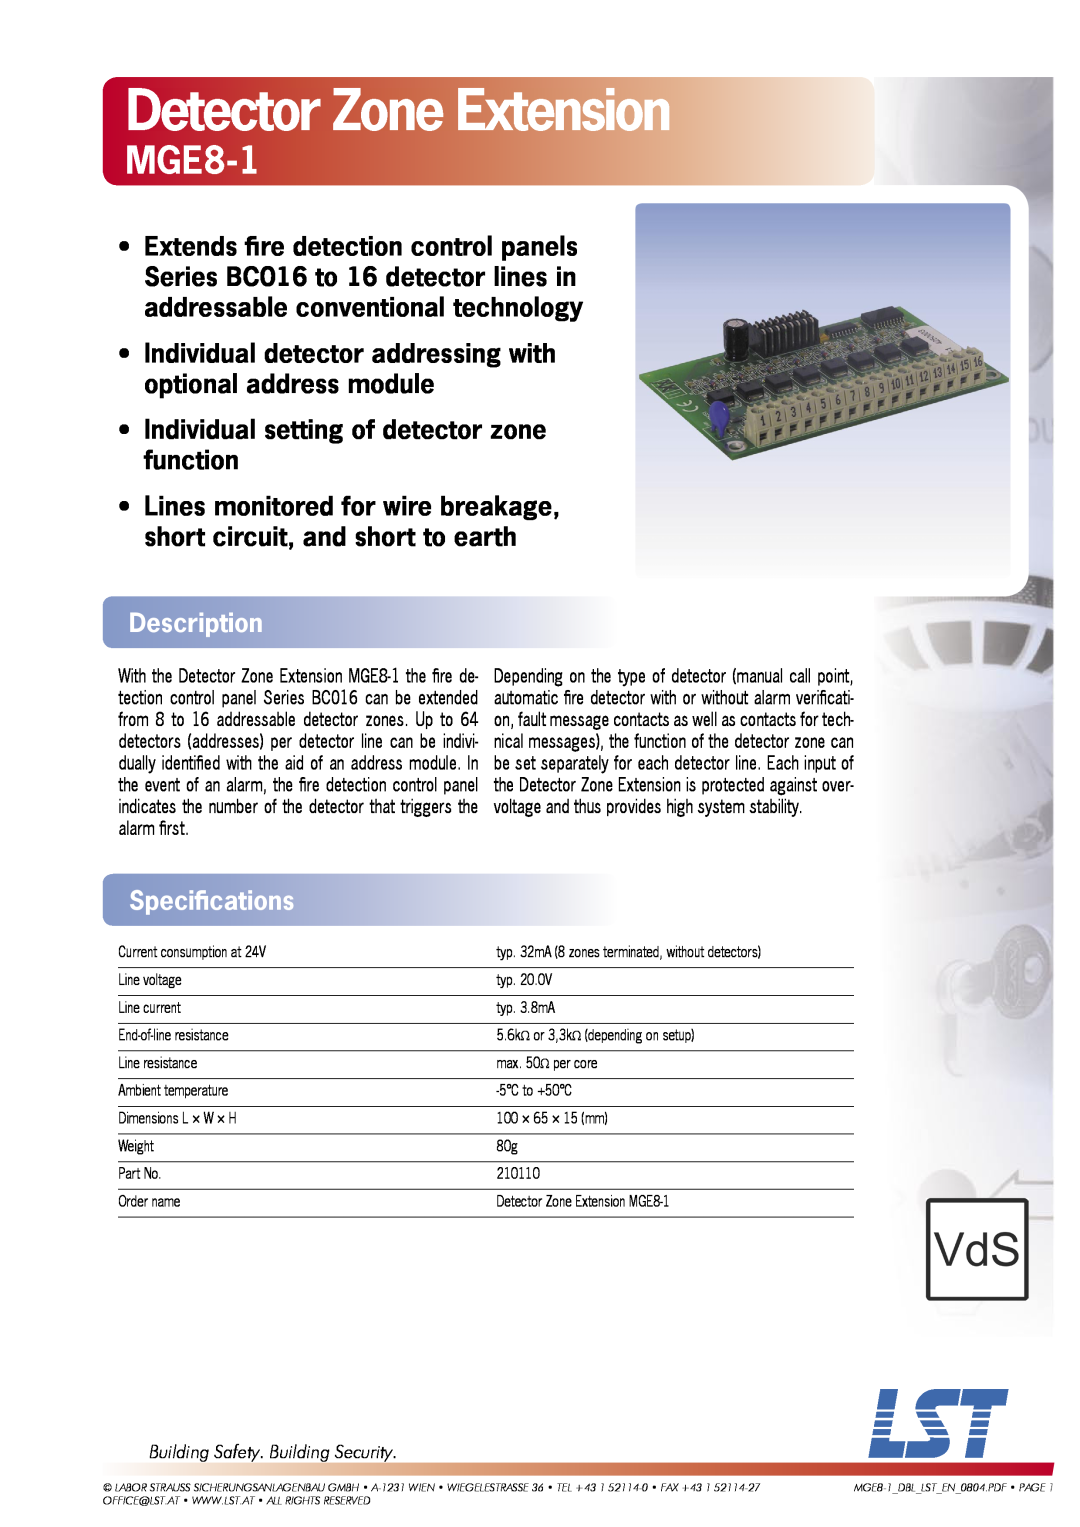 LST MGE8-1 specifications Detector Zone Extension, Individual setting of detector zone function, Description 